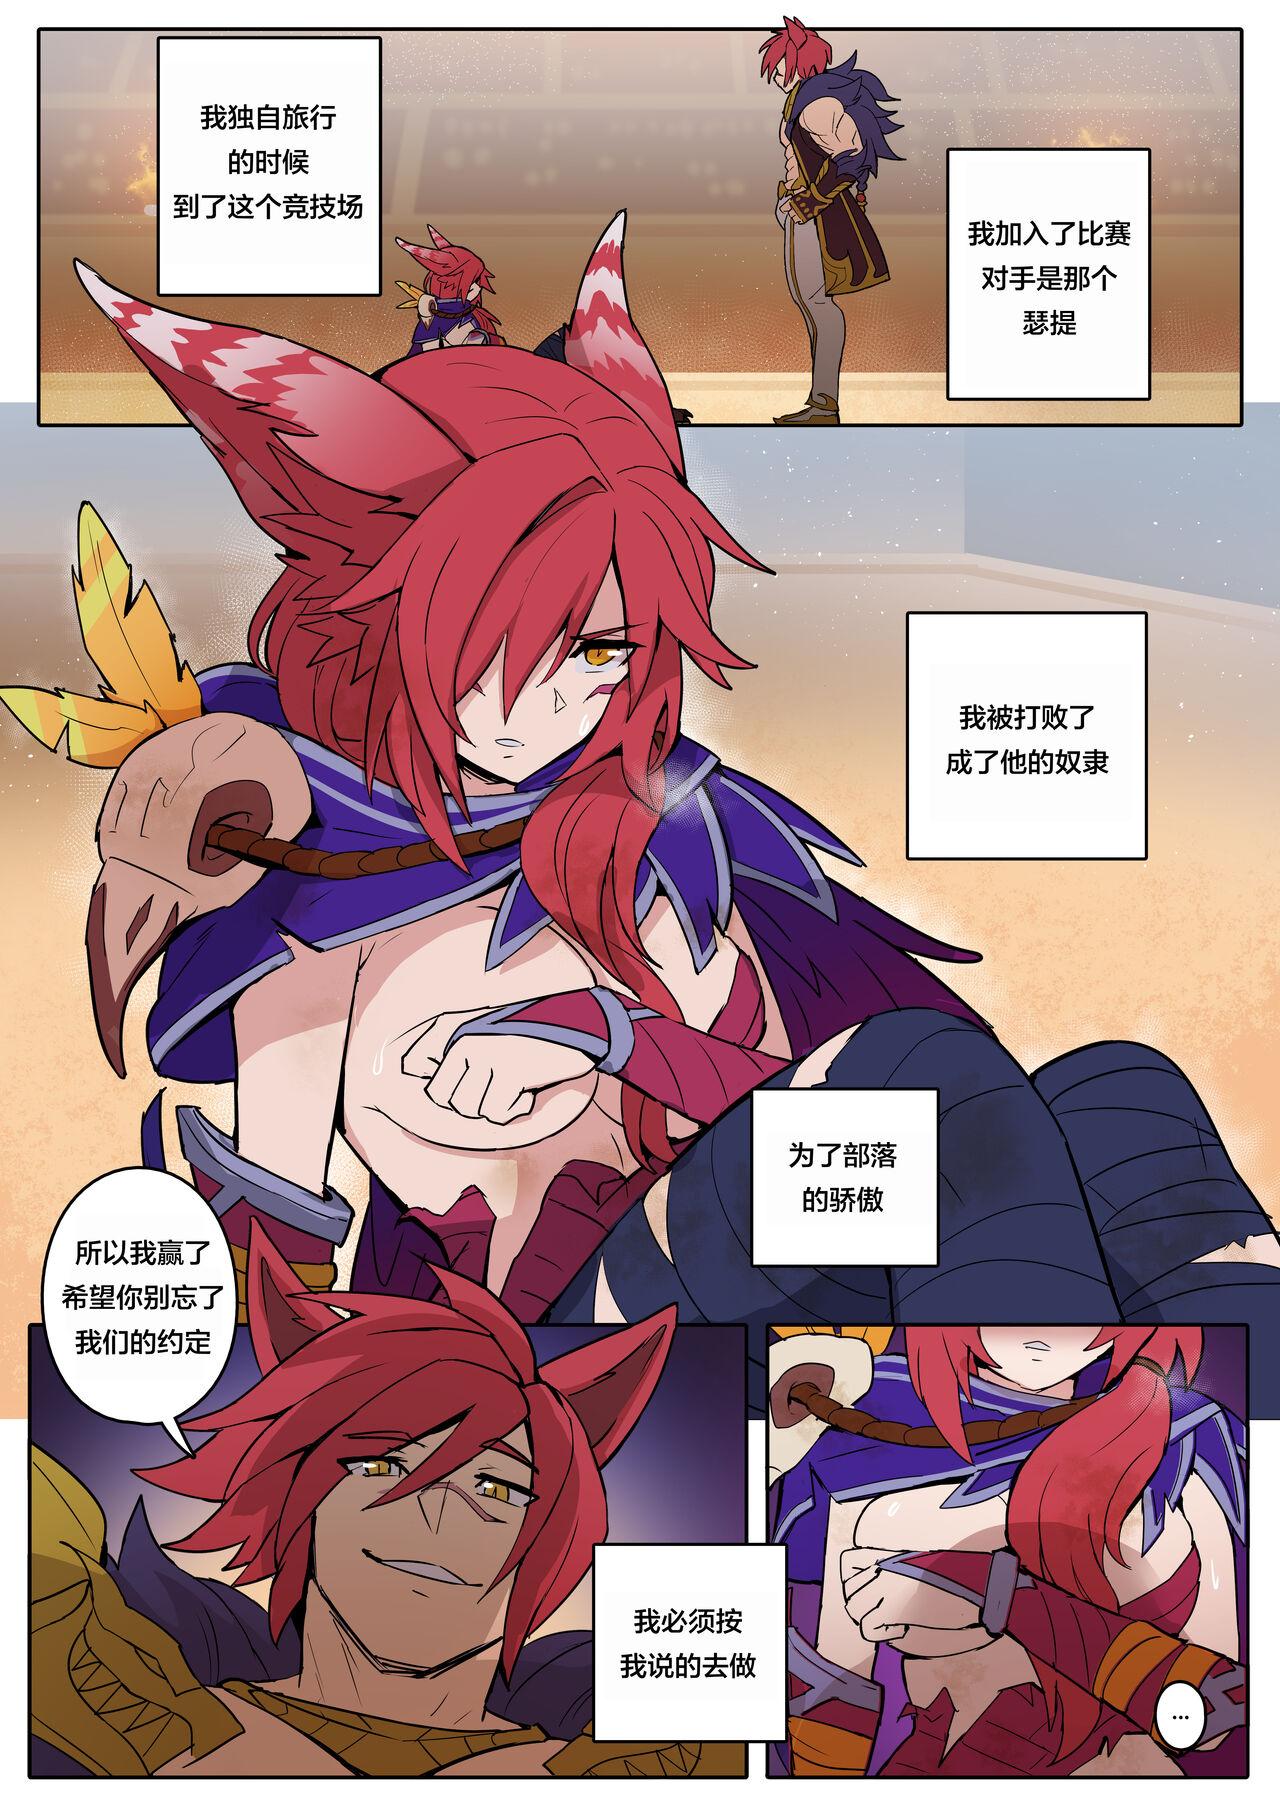 Porn Pussy Xayah Slave - League of legends Great Fuck - Page 1